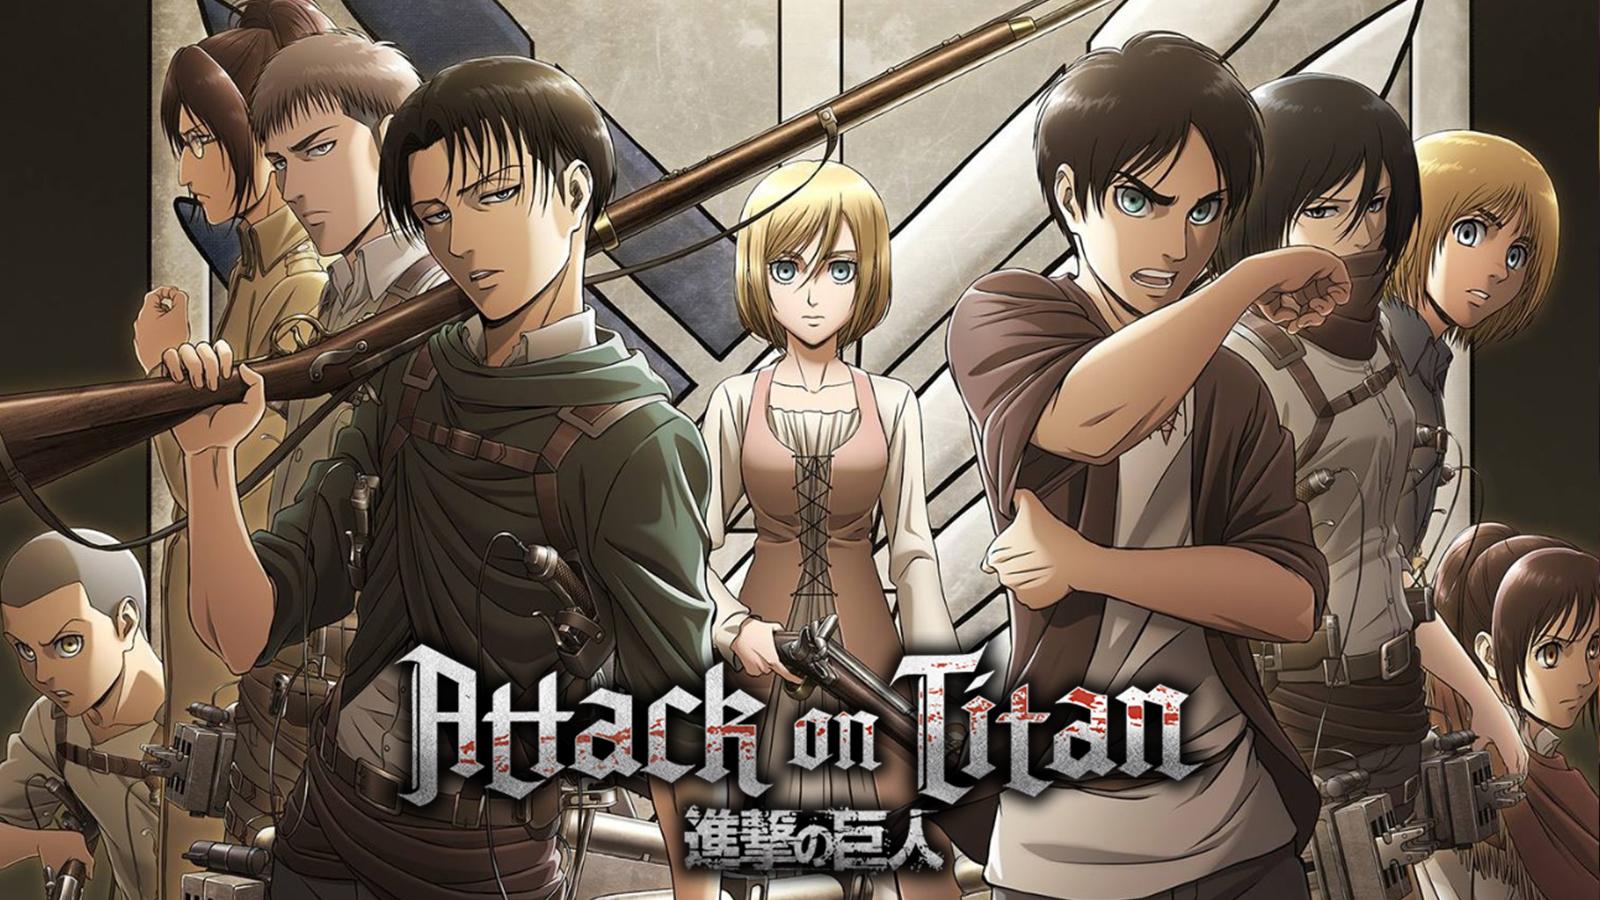 Attack on Titan Season 4 trailer gives first look at humanity's